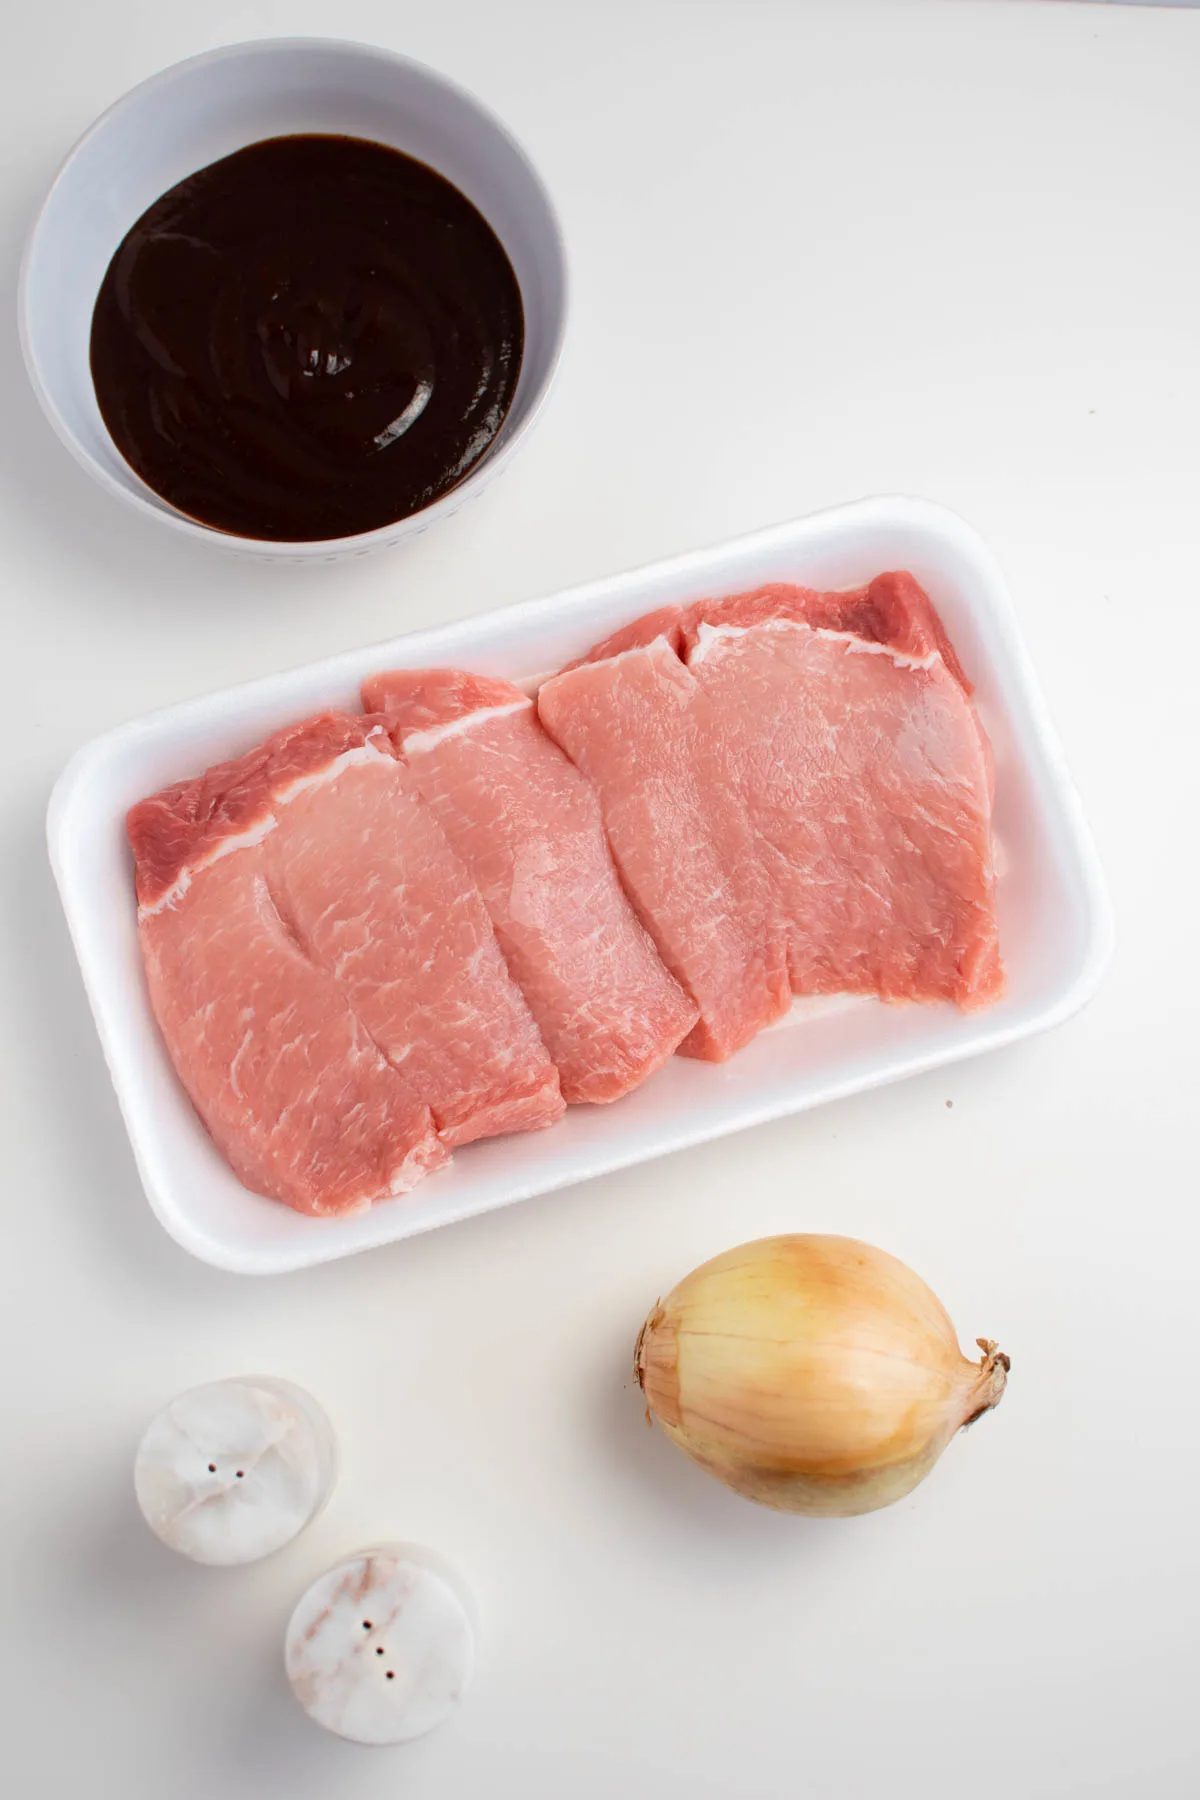 Country style rib ingredients on white table including raw ribs, onion, and barbeque sauce.